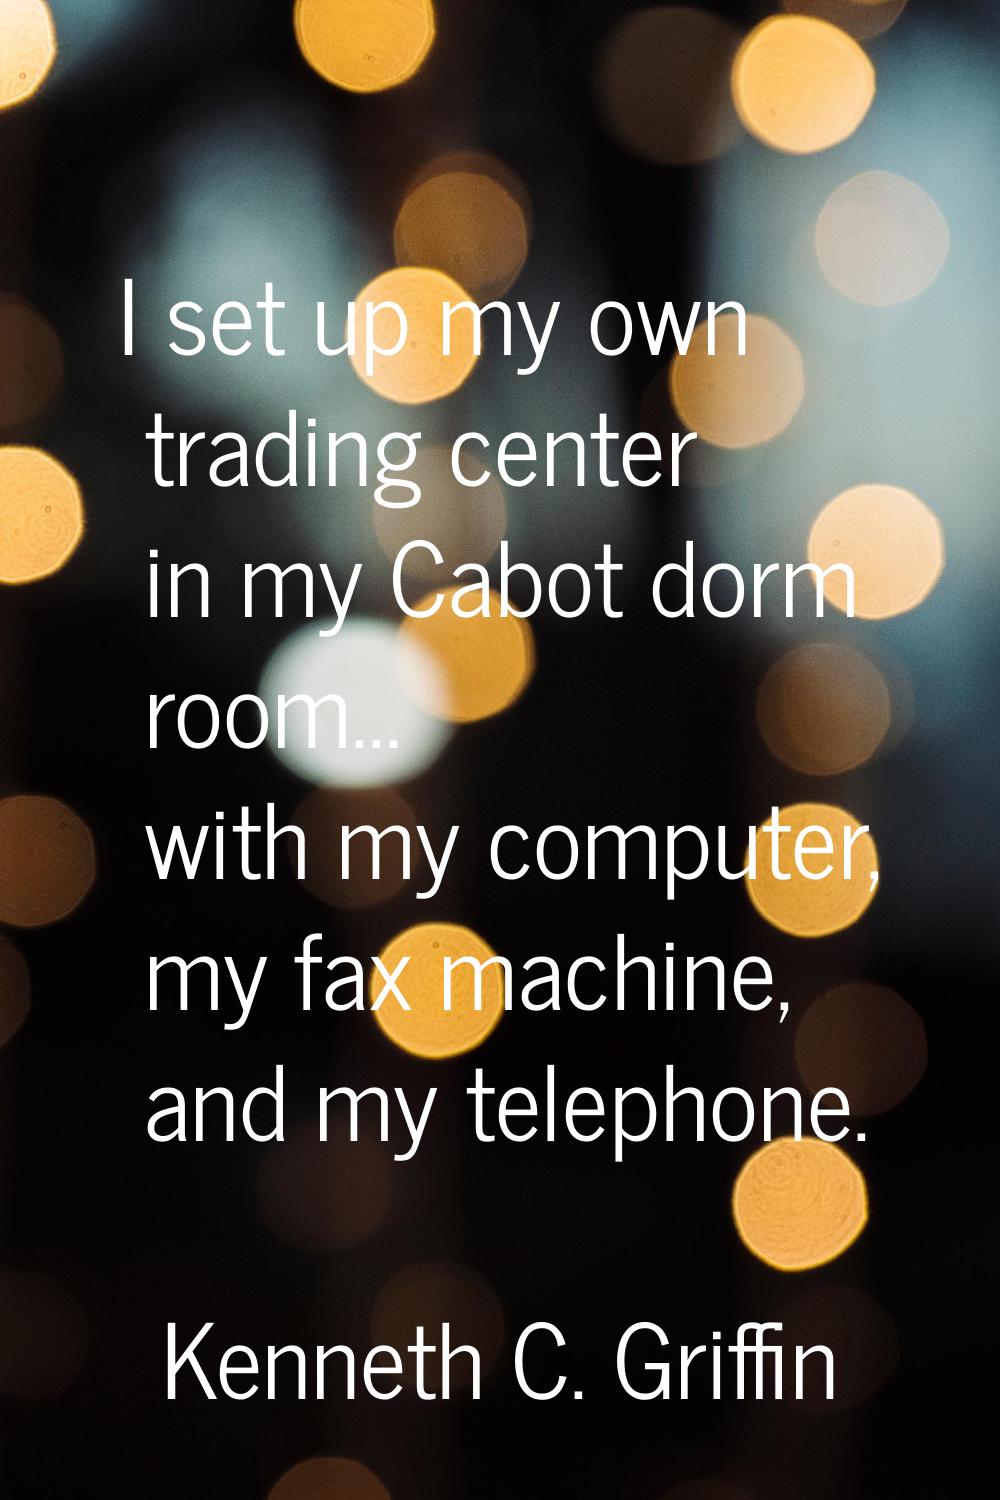 I set up my own trading center in my Cabot dorm room... with my computer, my fax machine, and my te